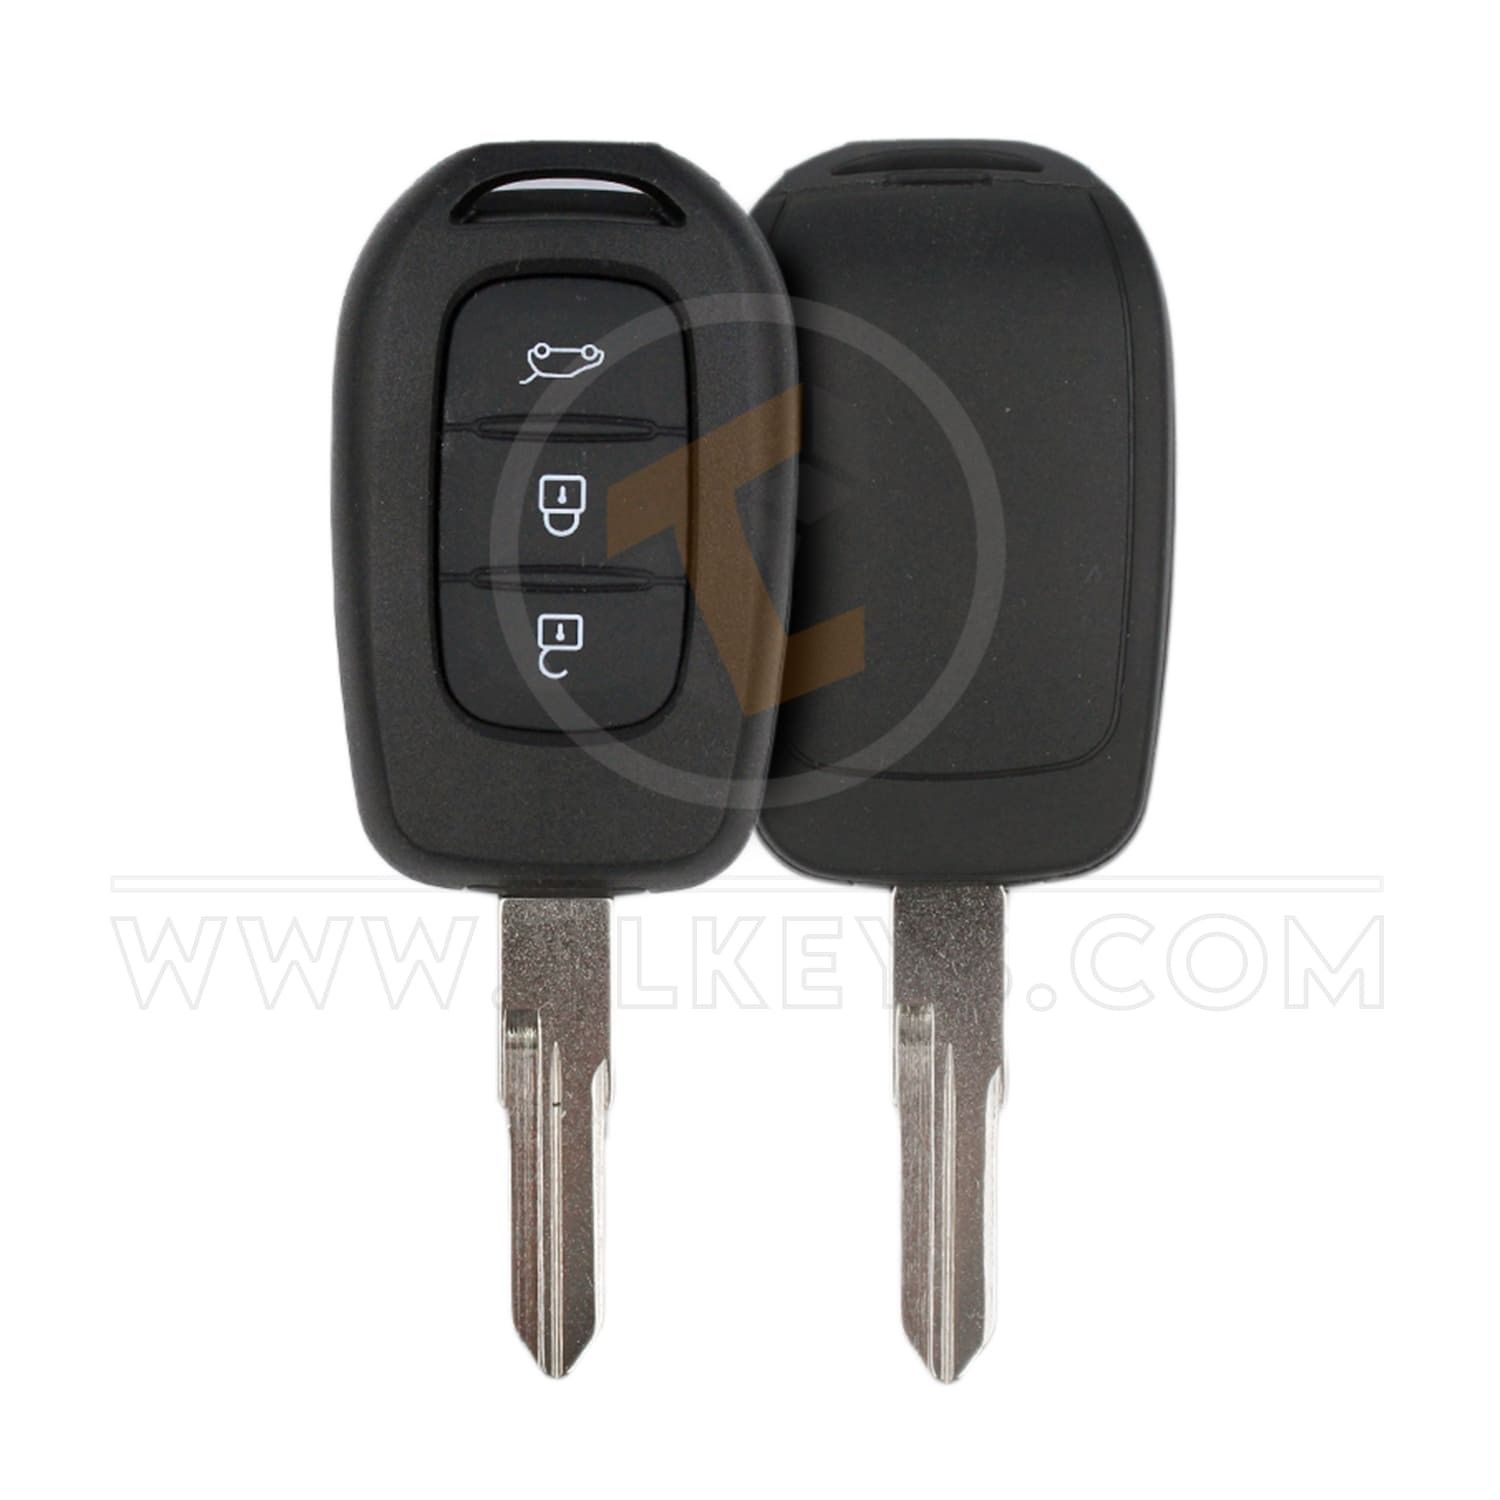  Renault Dacia Head Key Remote 2011 2016 433MHz 3 Buttons Frequency 433MHz